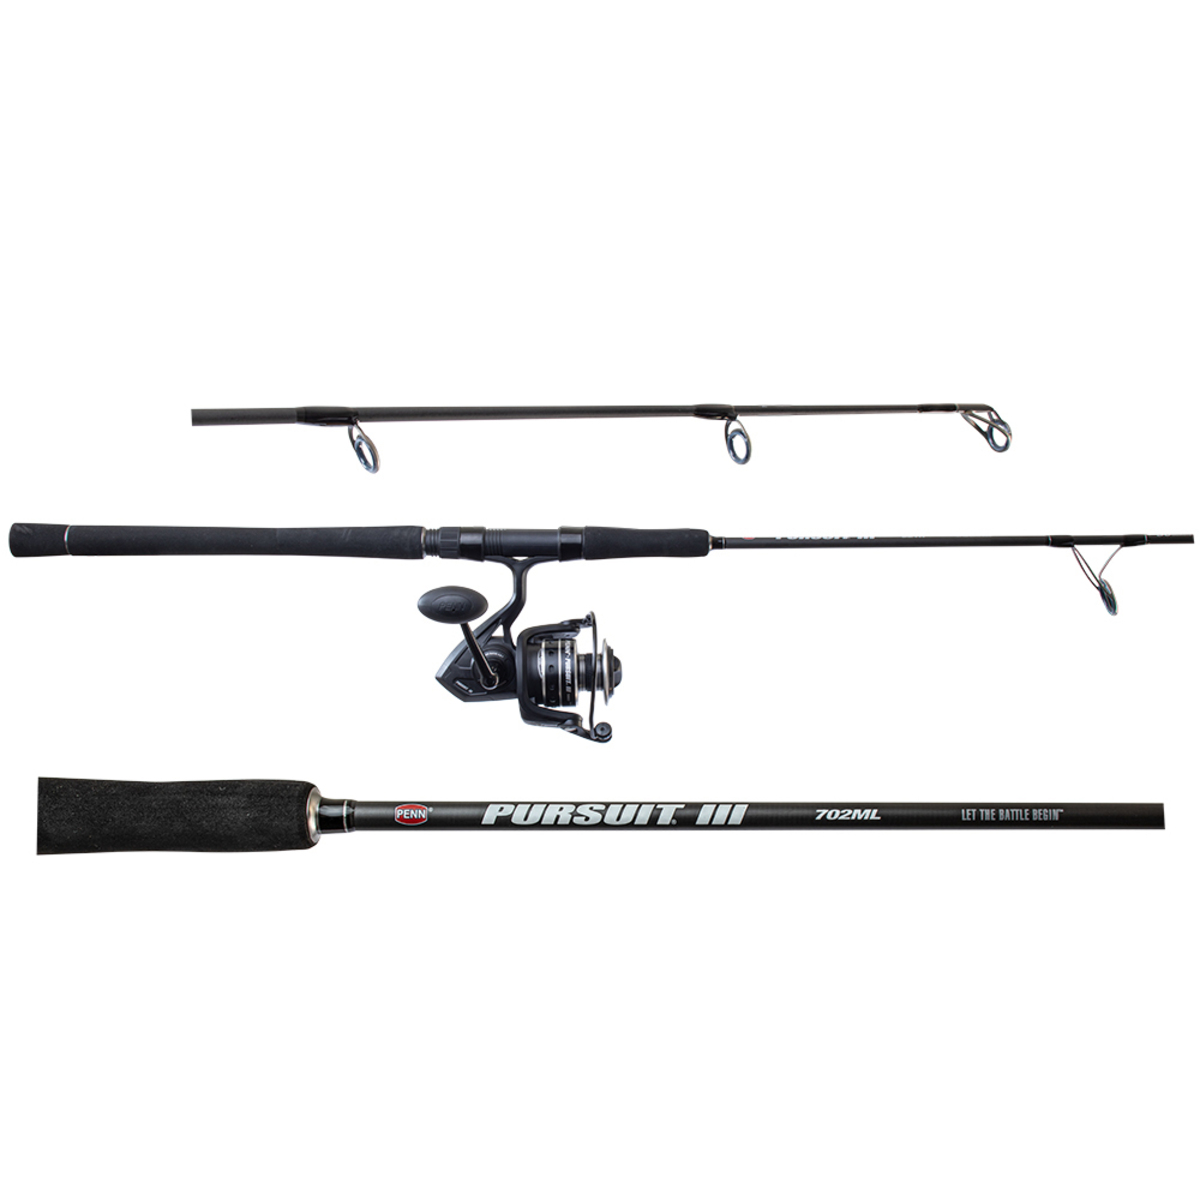 https://www.smartmarine.co.nz/cdn/images/products/xlarge/8080114_pursuit_iv_3000_pursuit_733h_73_6-10kg_spinning_combo_2-piece_with_braid.jpg